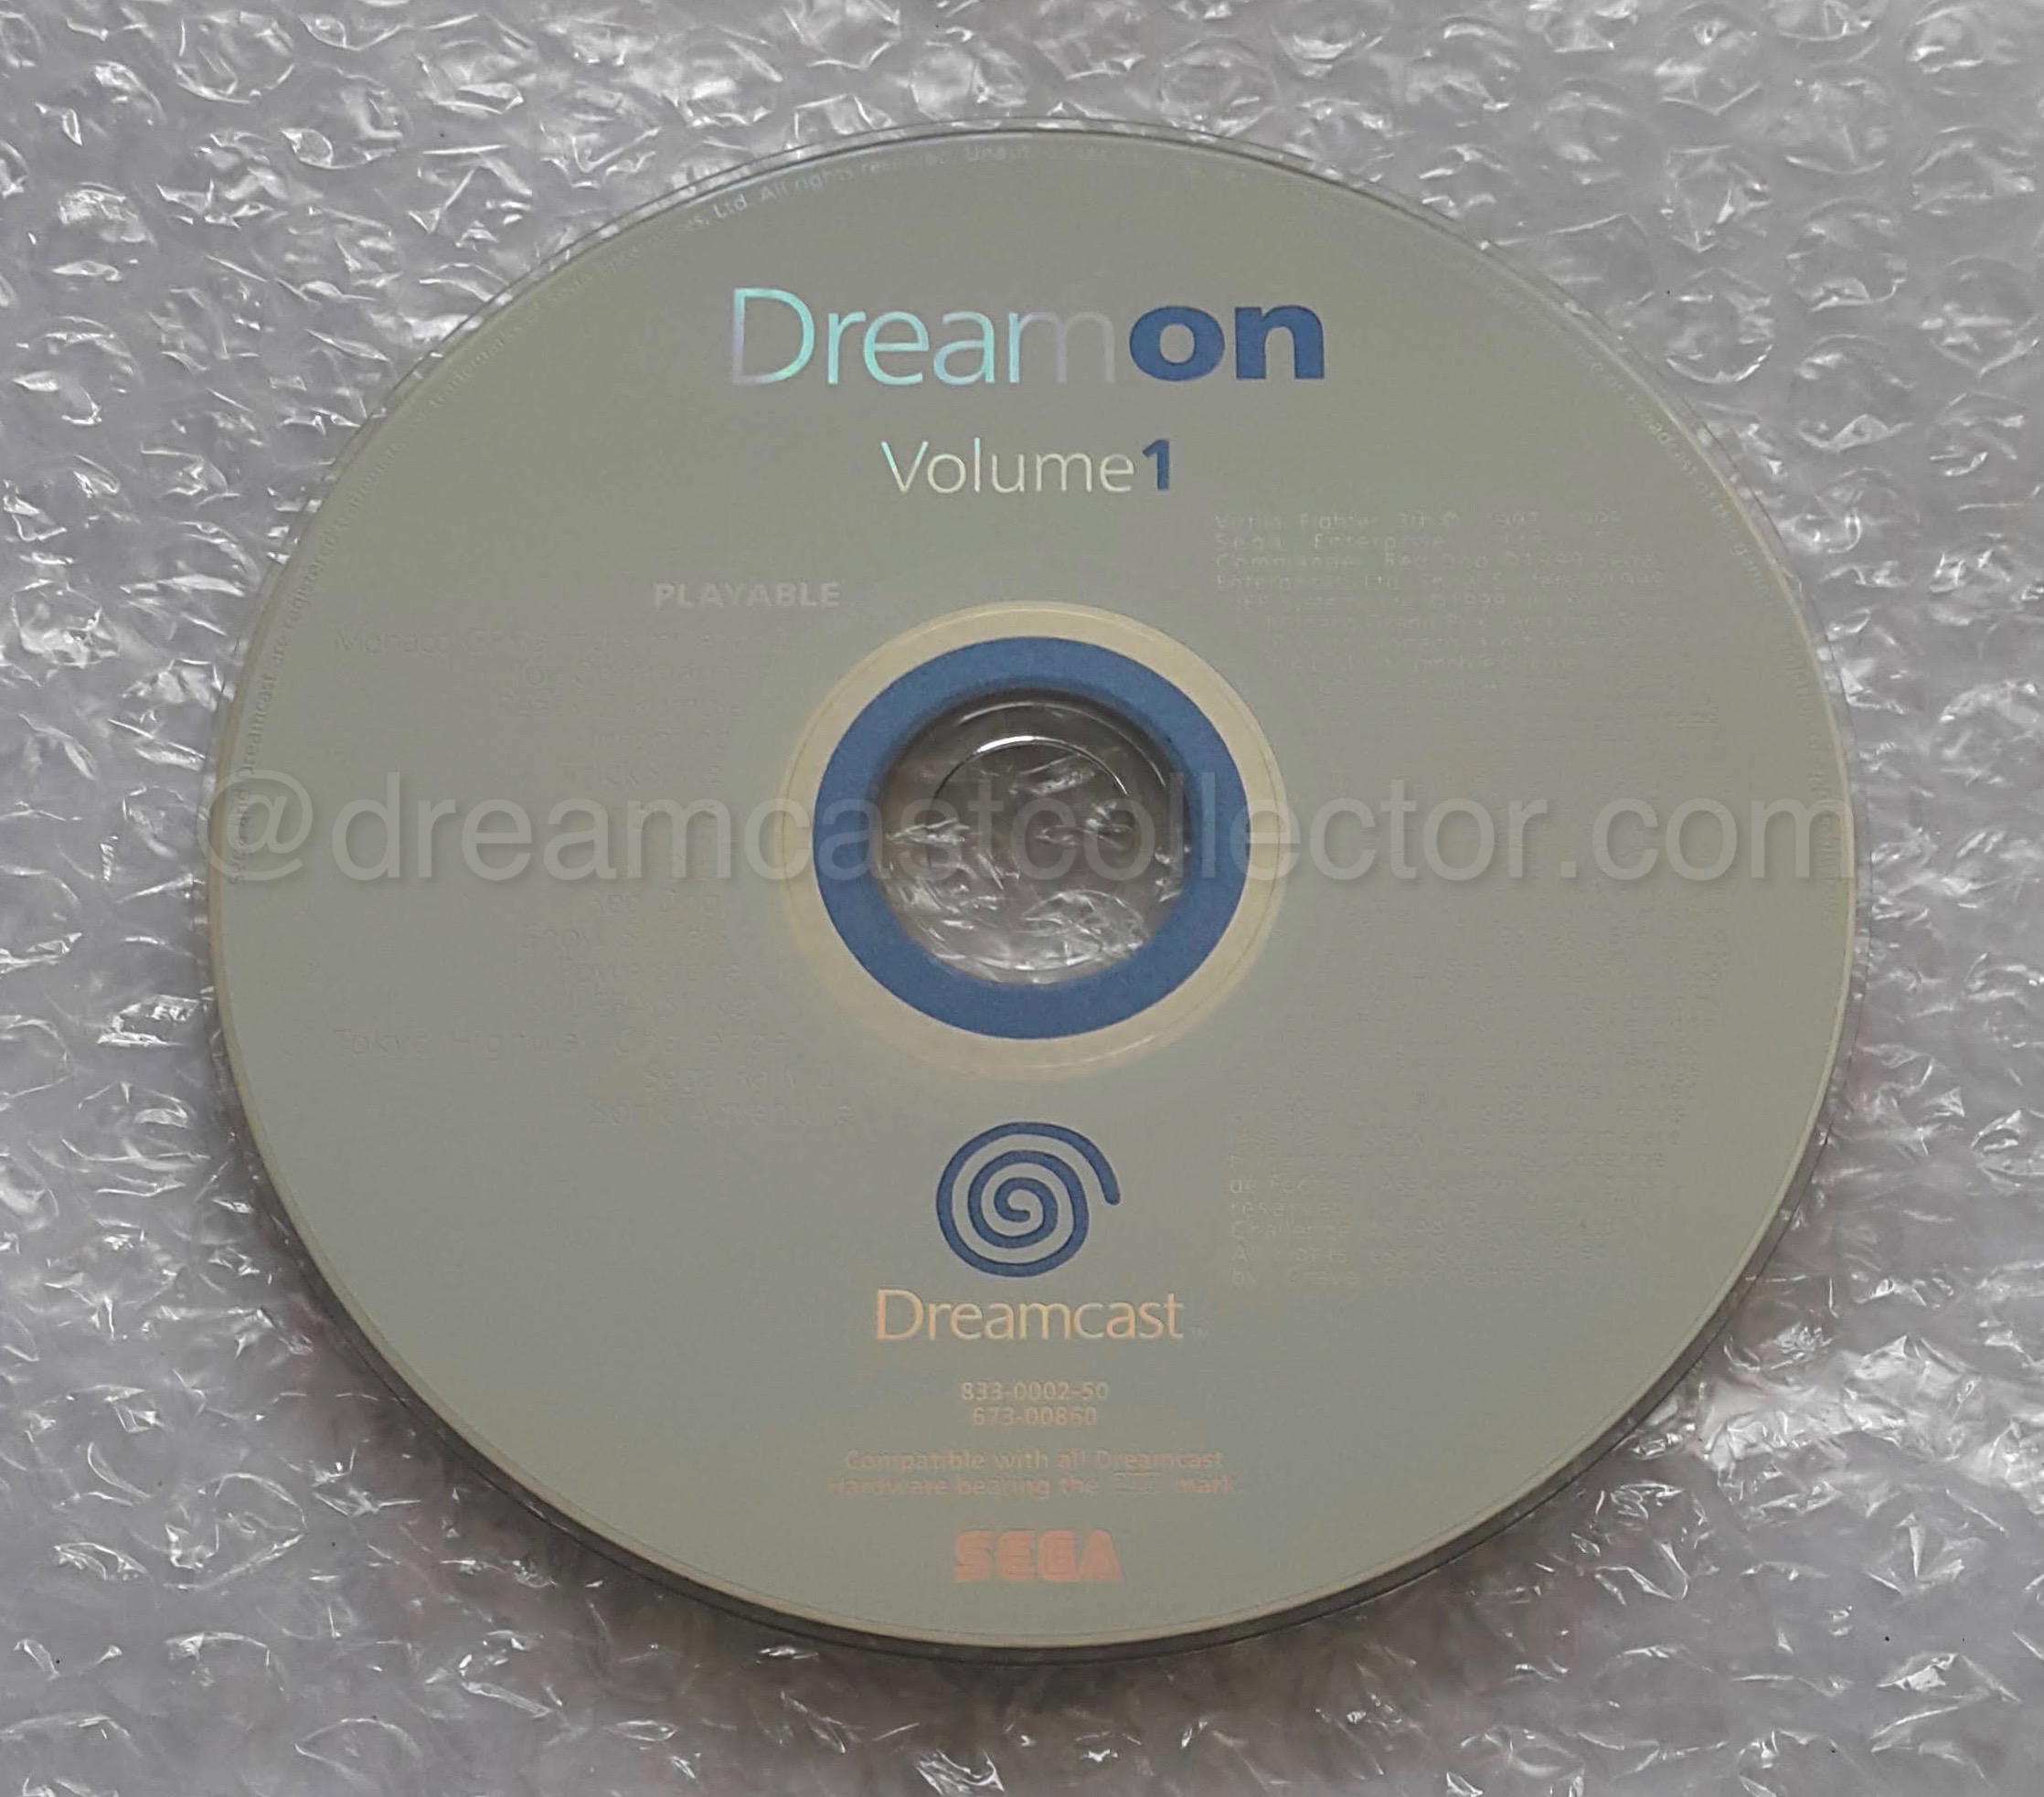 I suspect that DreamOn Volume 1 will be very familiar to many European Dreamcast owners as it was the default pack-in demo disc for early Dreamcast systems. Given that it was so ubiquitous it's unsurprising that it exists in many disc variants as well as packaging types. My copy from around the time of the systems UK launch came packaged in a transparent jewel case without any inserts. It was at some undetermined point replaced, with a domestic version manufactured by EMI HOLLAND still packaged in the same fashion. The last revision was both a copy of the original DreamKey & DreamOn Volume 1 packaged together in a single jewel case with both front and back inserts.